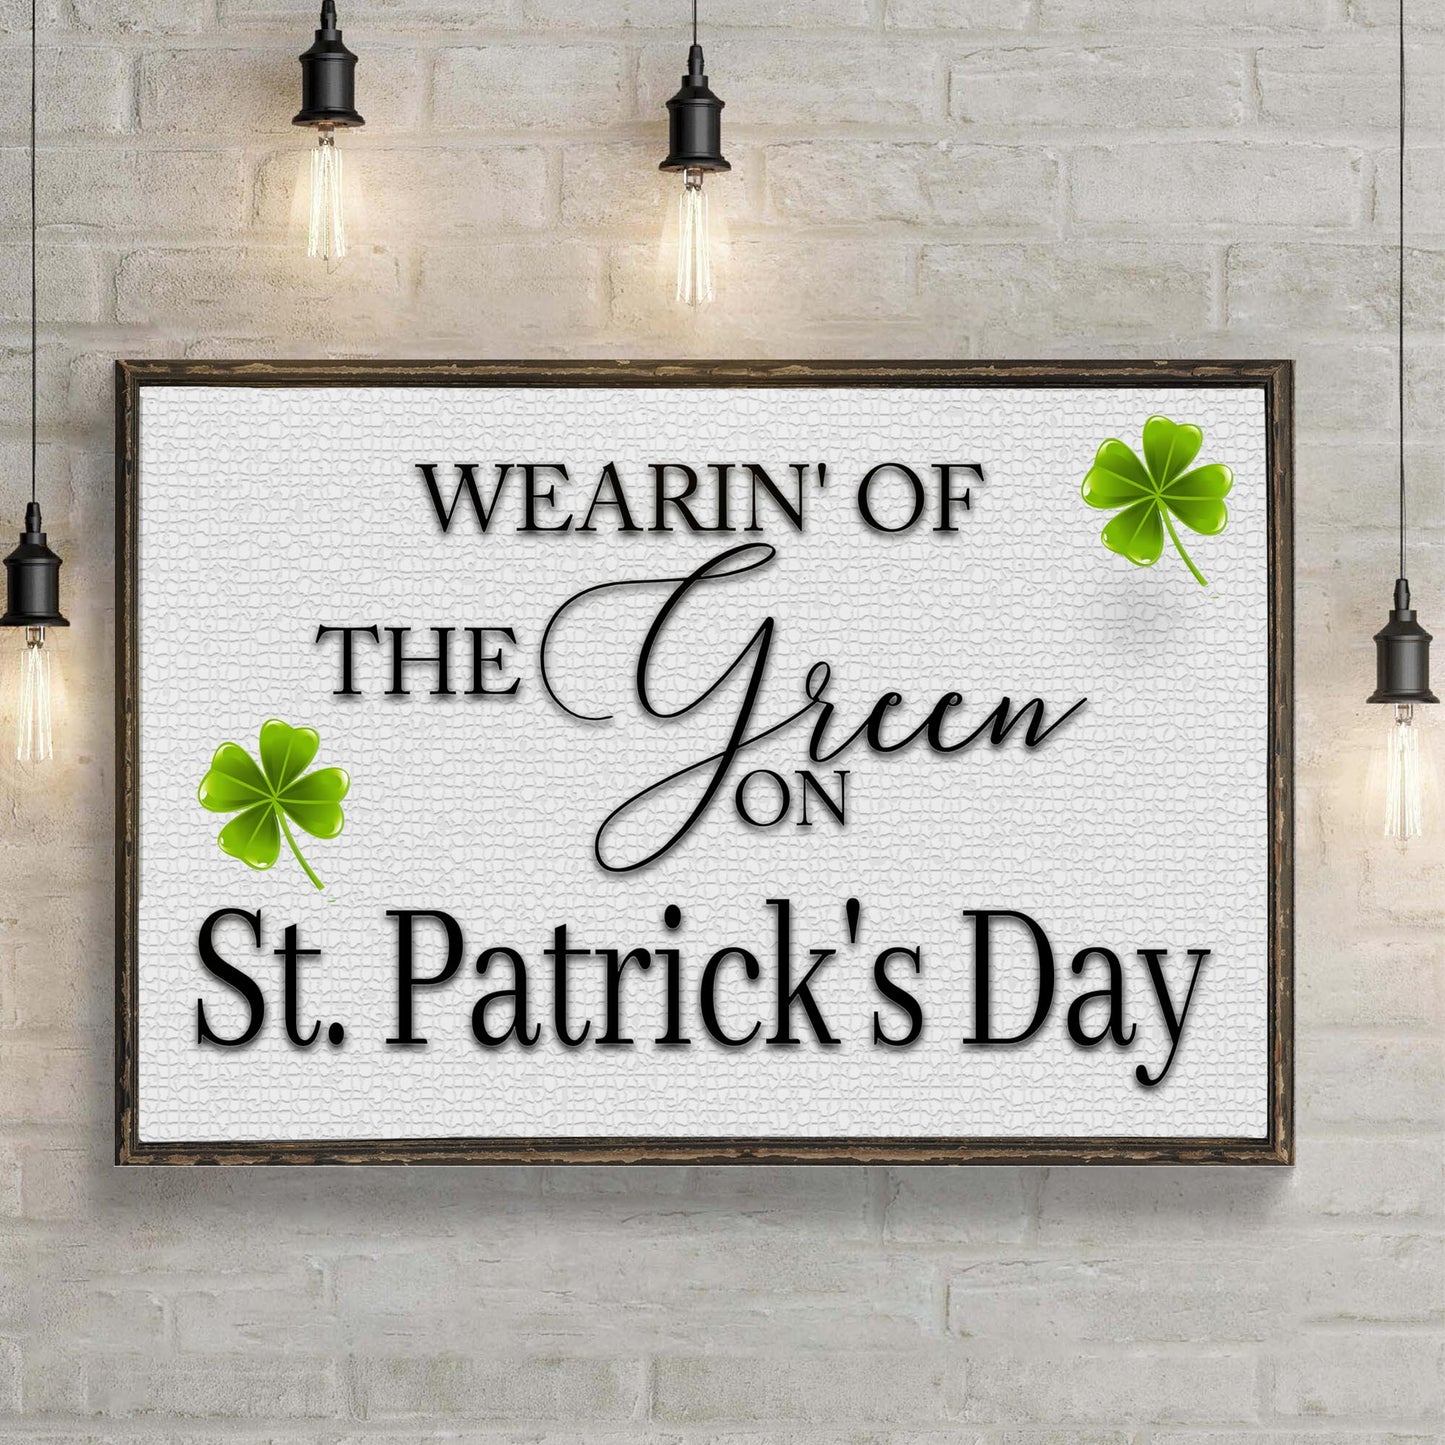 Wearin' Of The Green On St. Patrick's Day Sign Style 1 - Image by Tailored Canvases